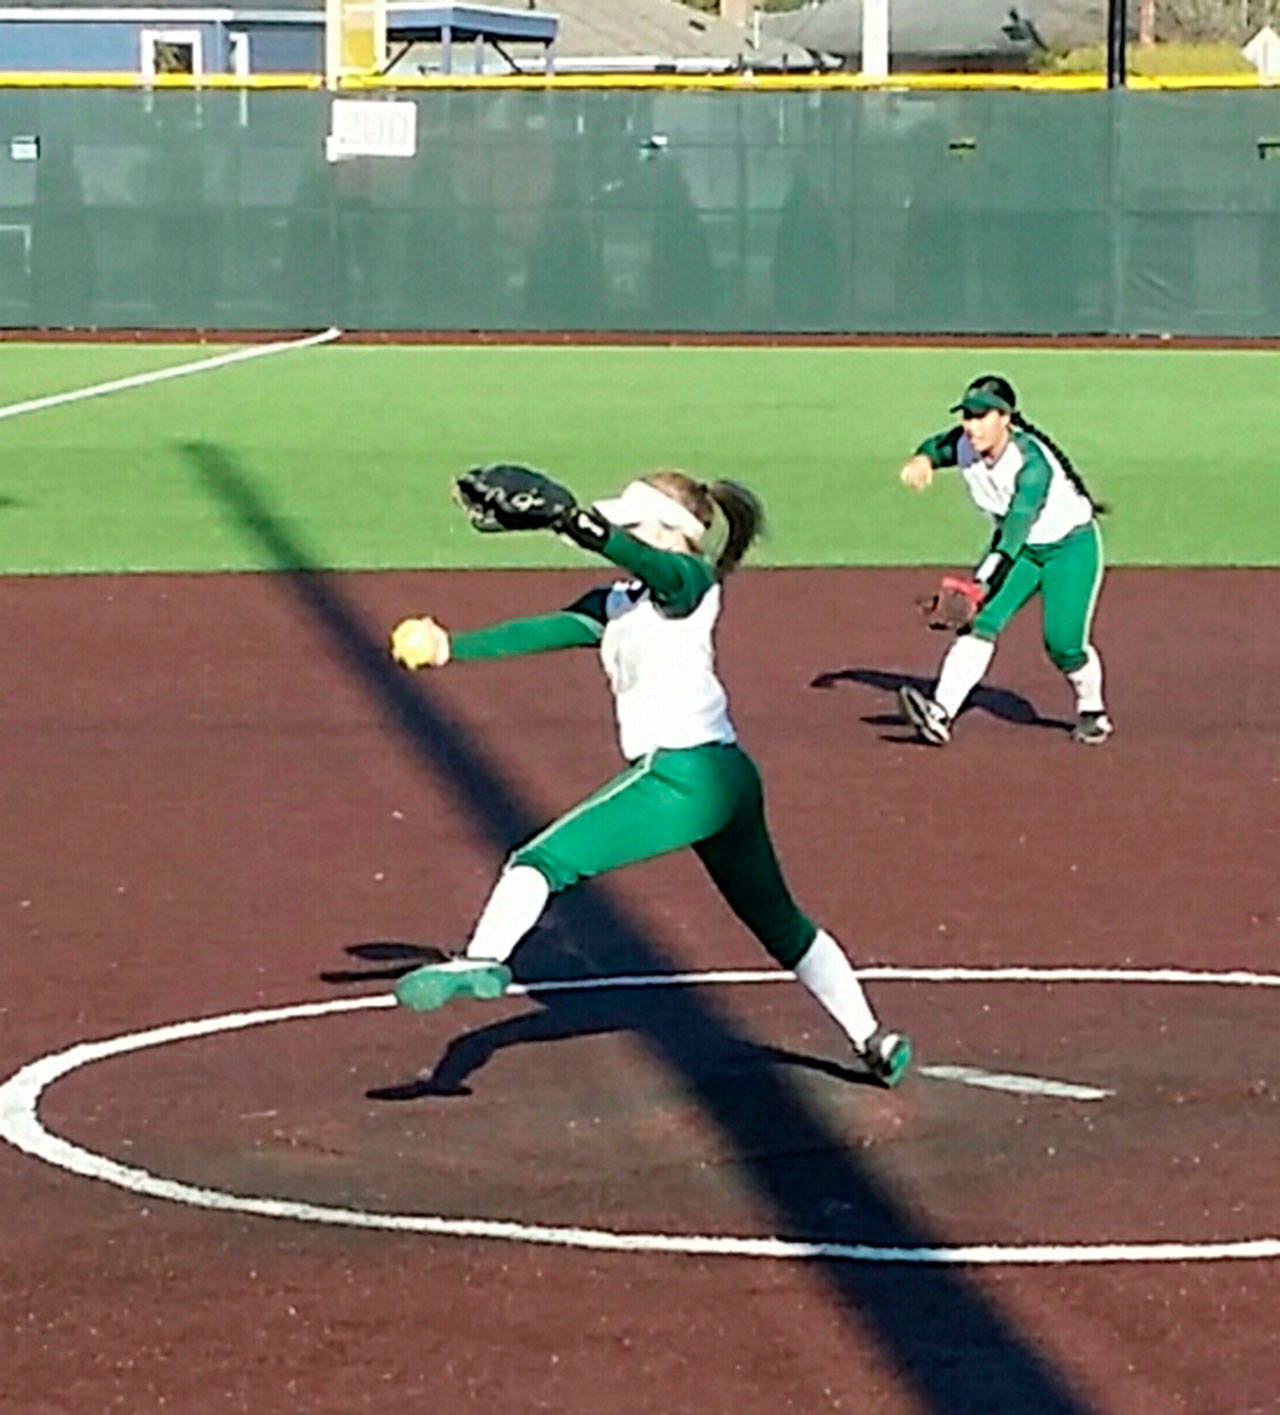 Auburn’s Kiana Adams delivers a pitch against Kentridge on Tuesday, an effort that ended in perfection. COURTESY PHOTO